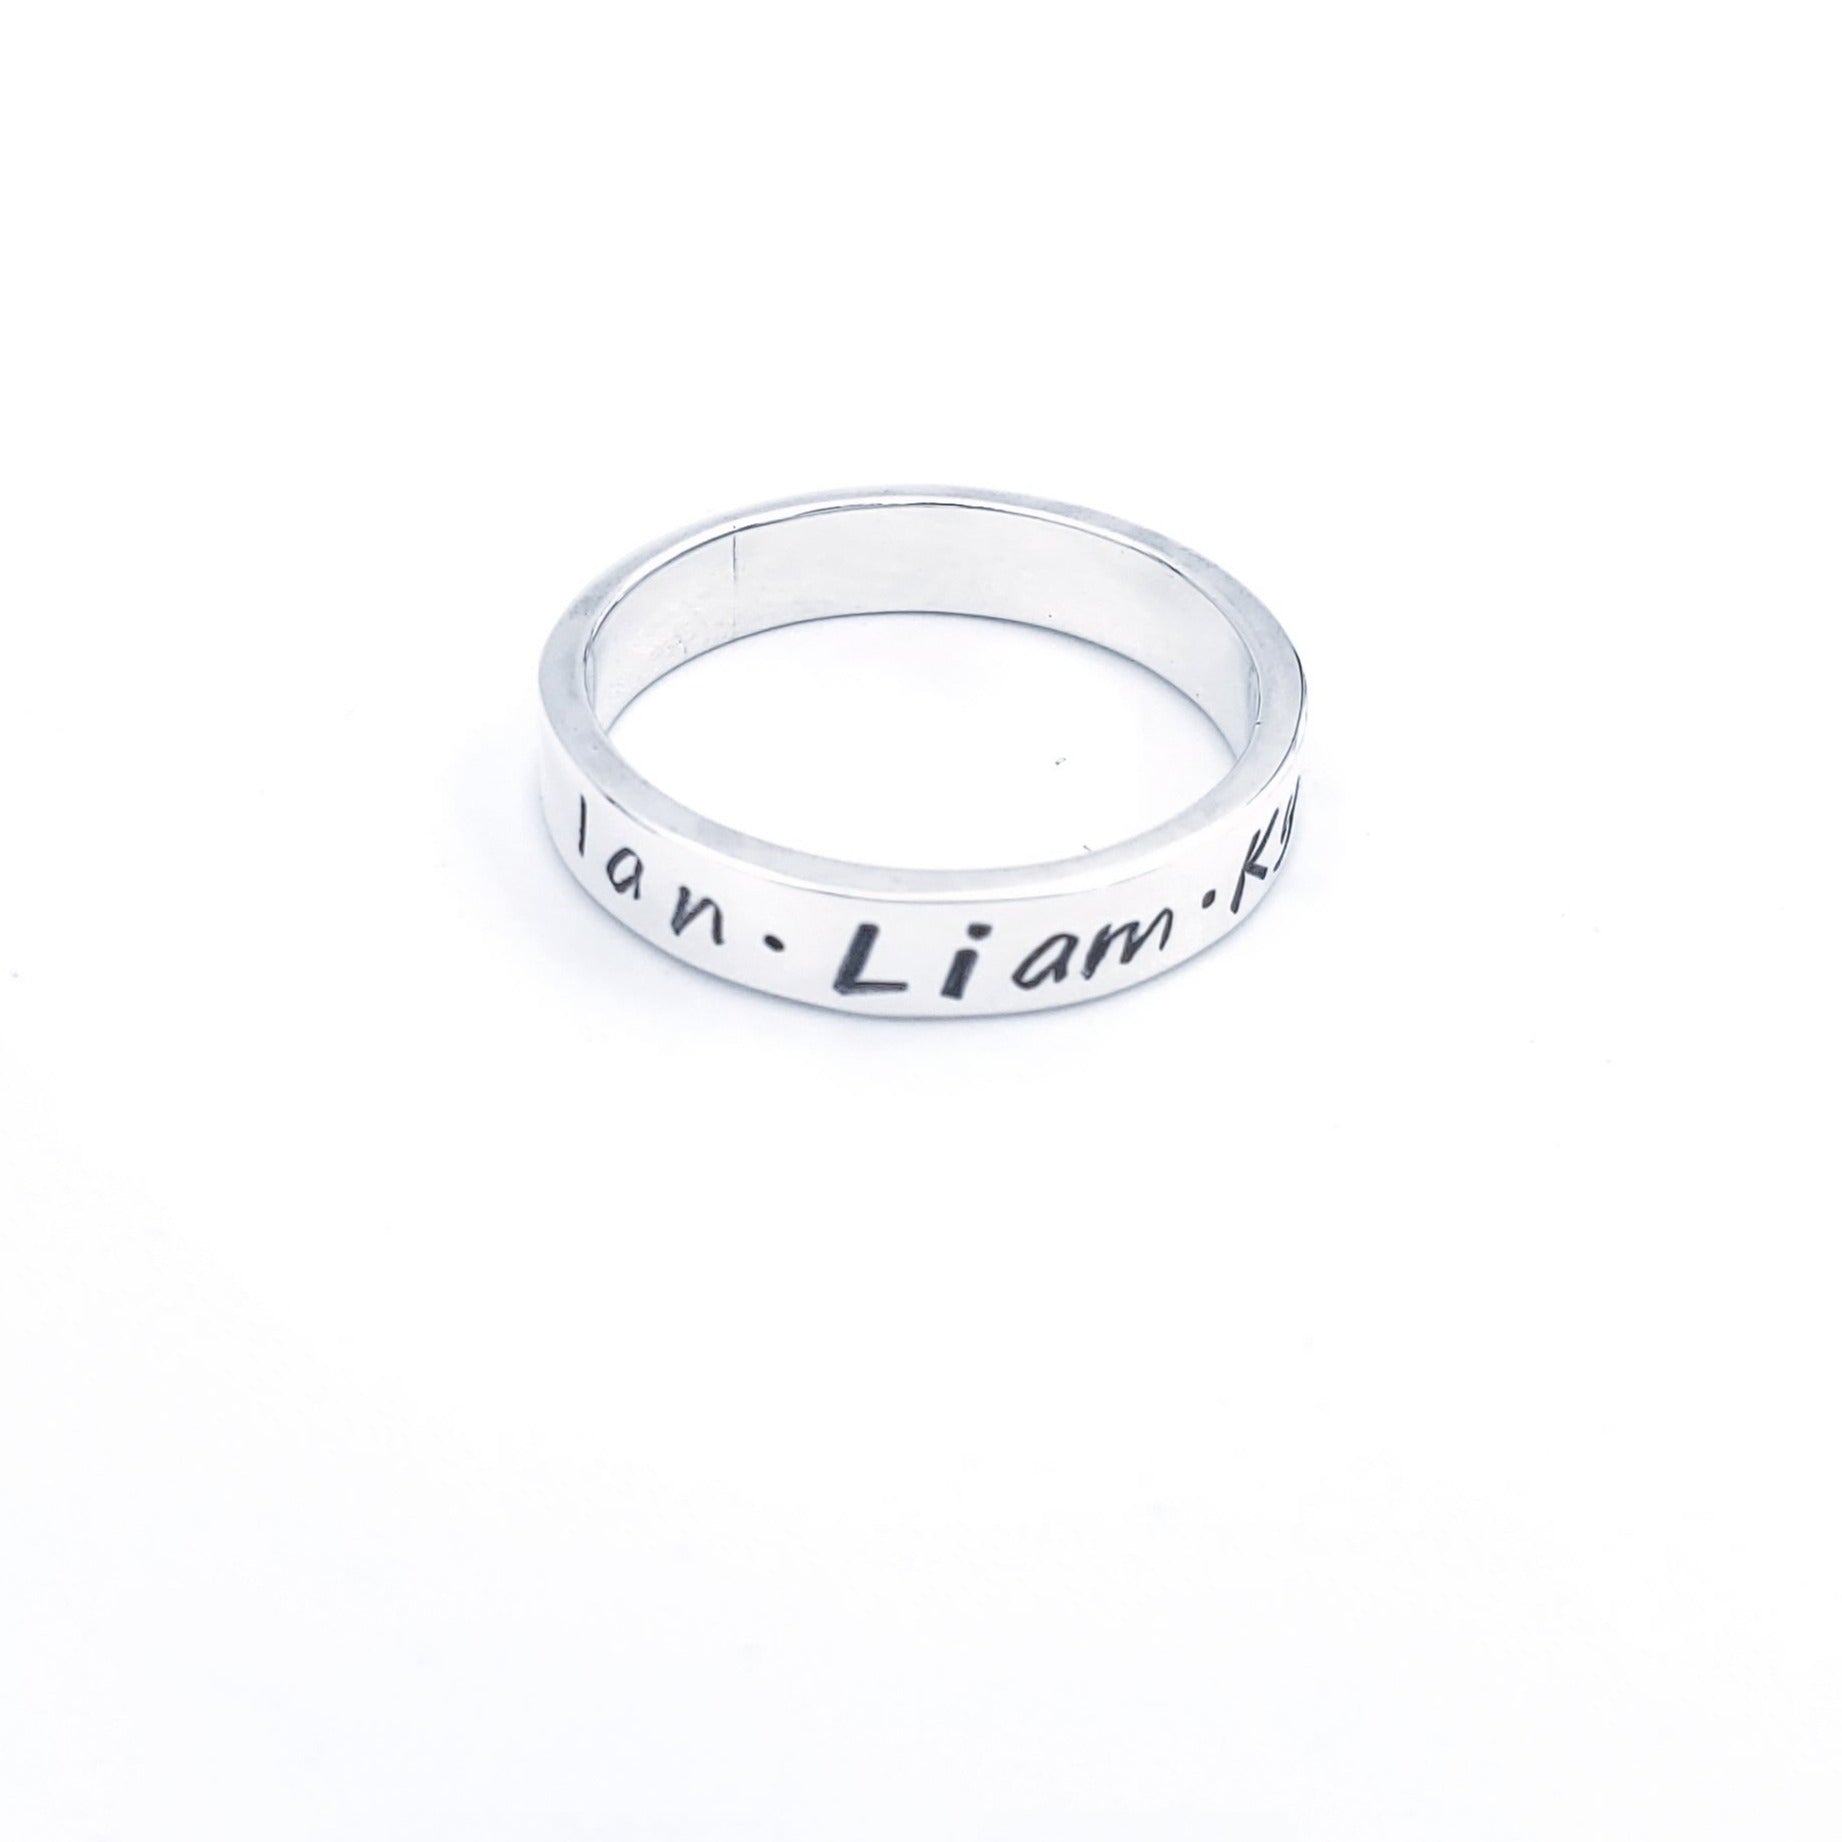 Name ring with names Ian and Liam